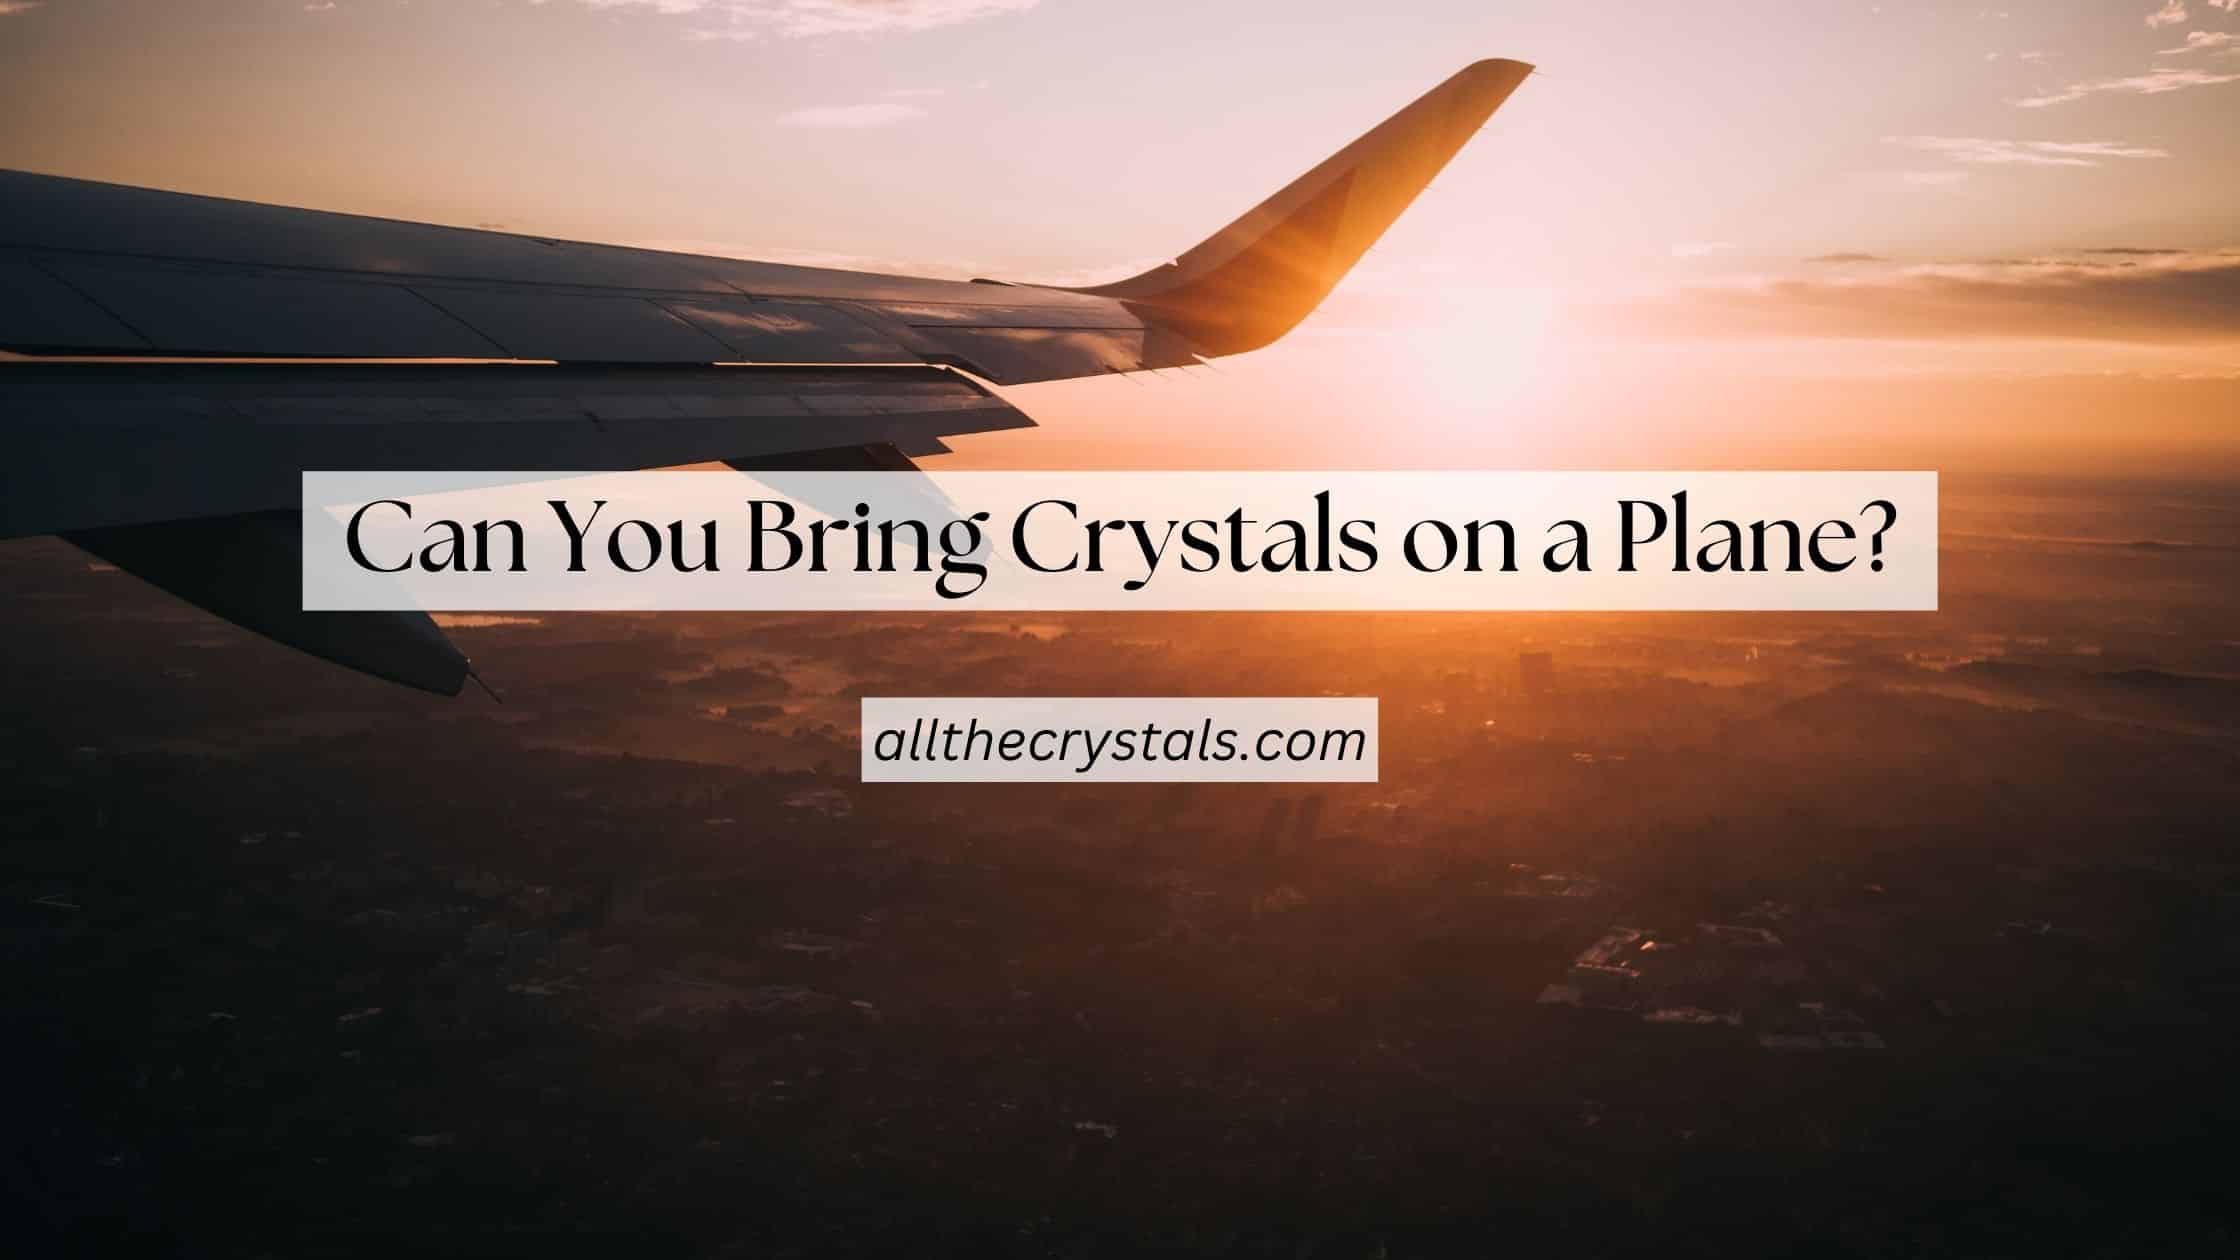 can you bring crystals on a plane?